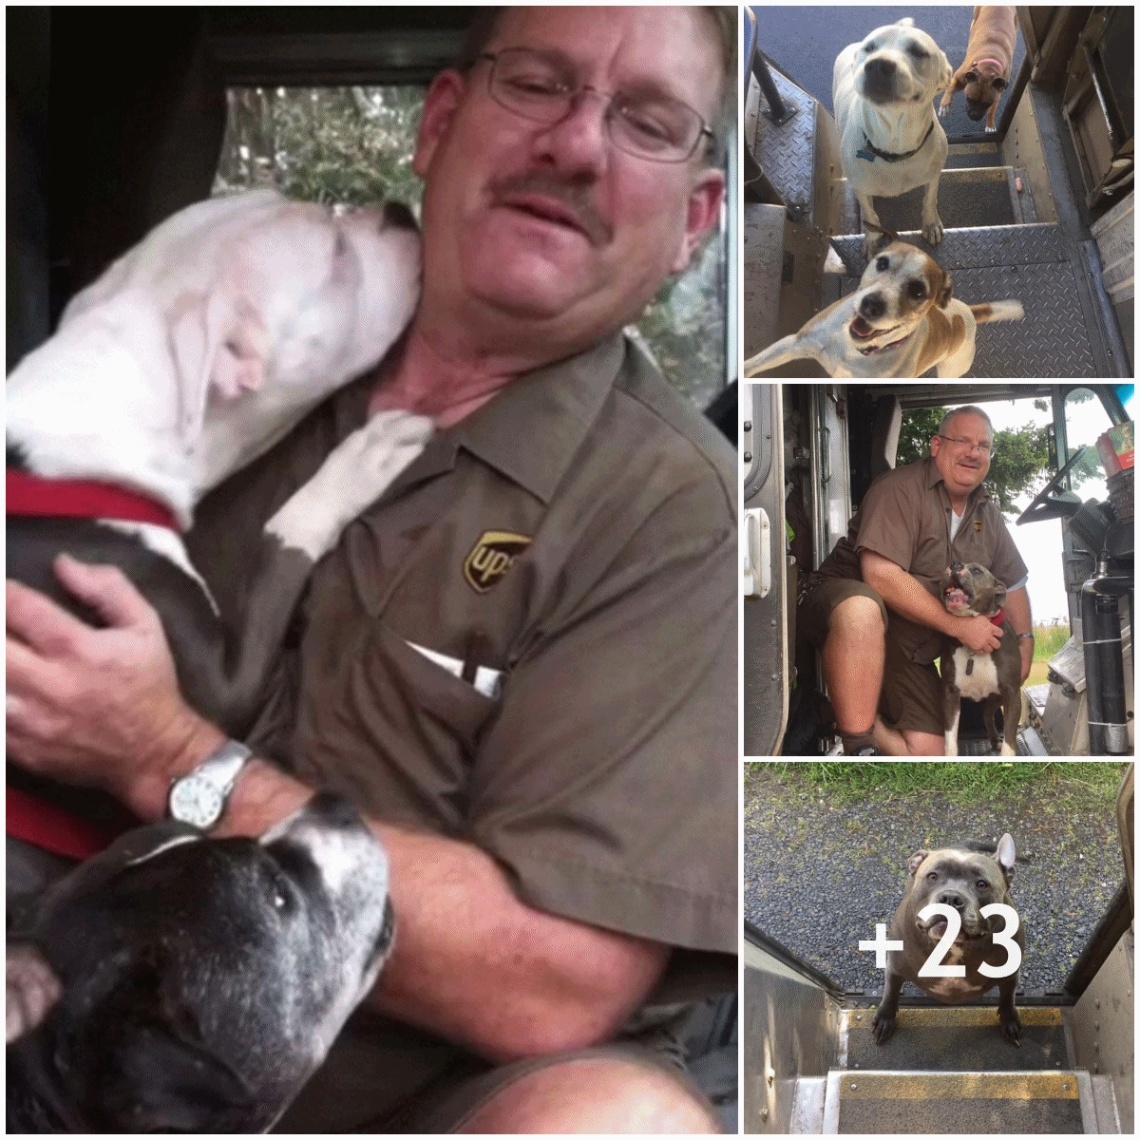 The bus driver has a special relationship with all the dogs on his delivery route.